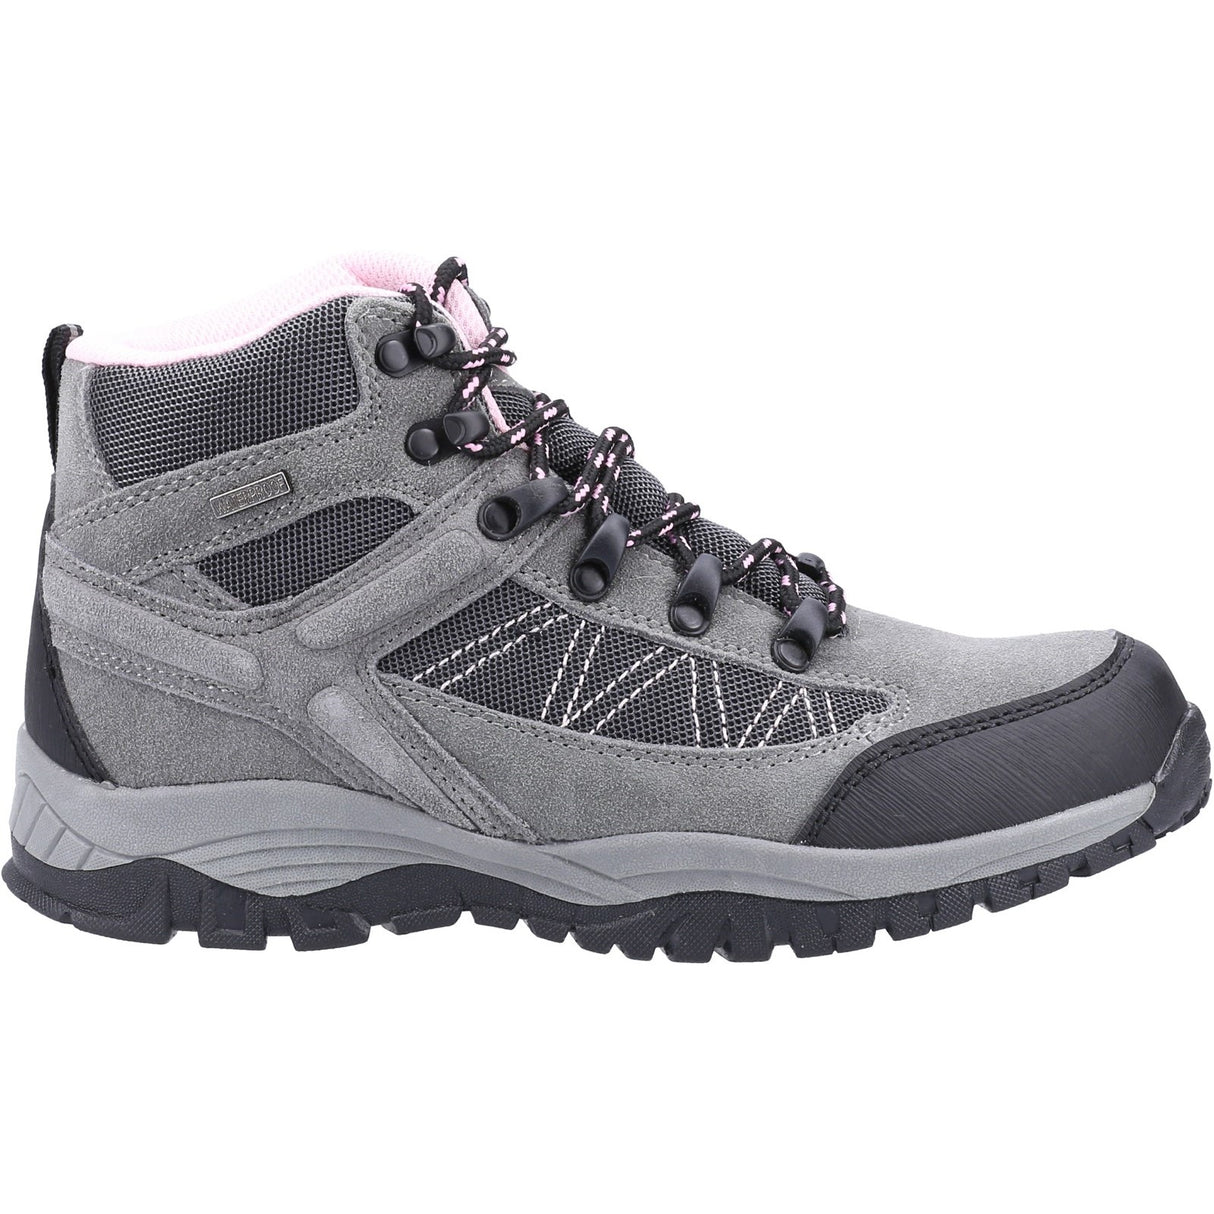 Cotswold Maisemore Ladies Hiking Boots